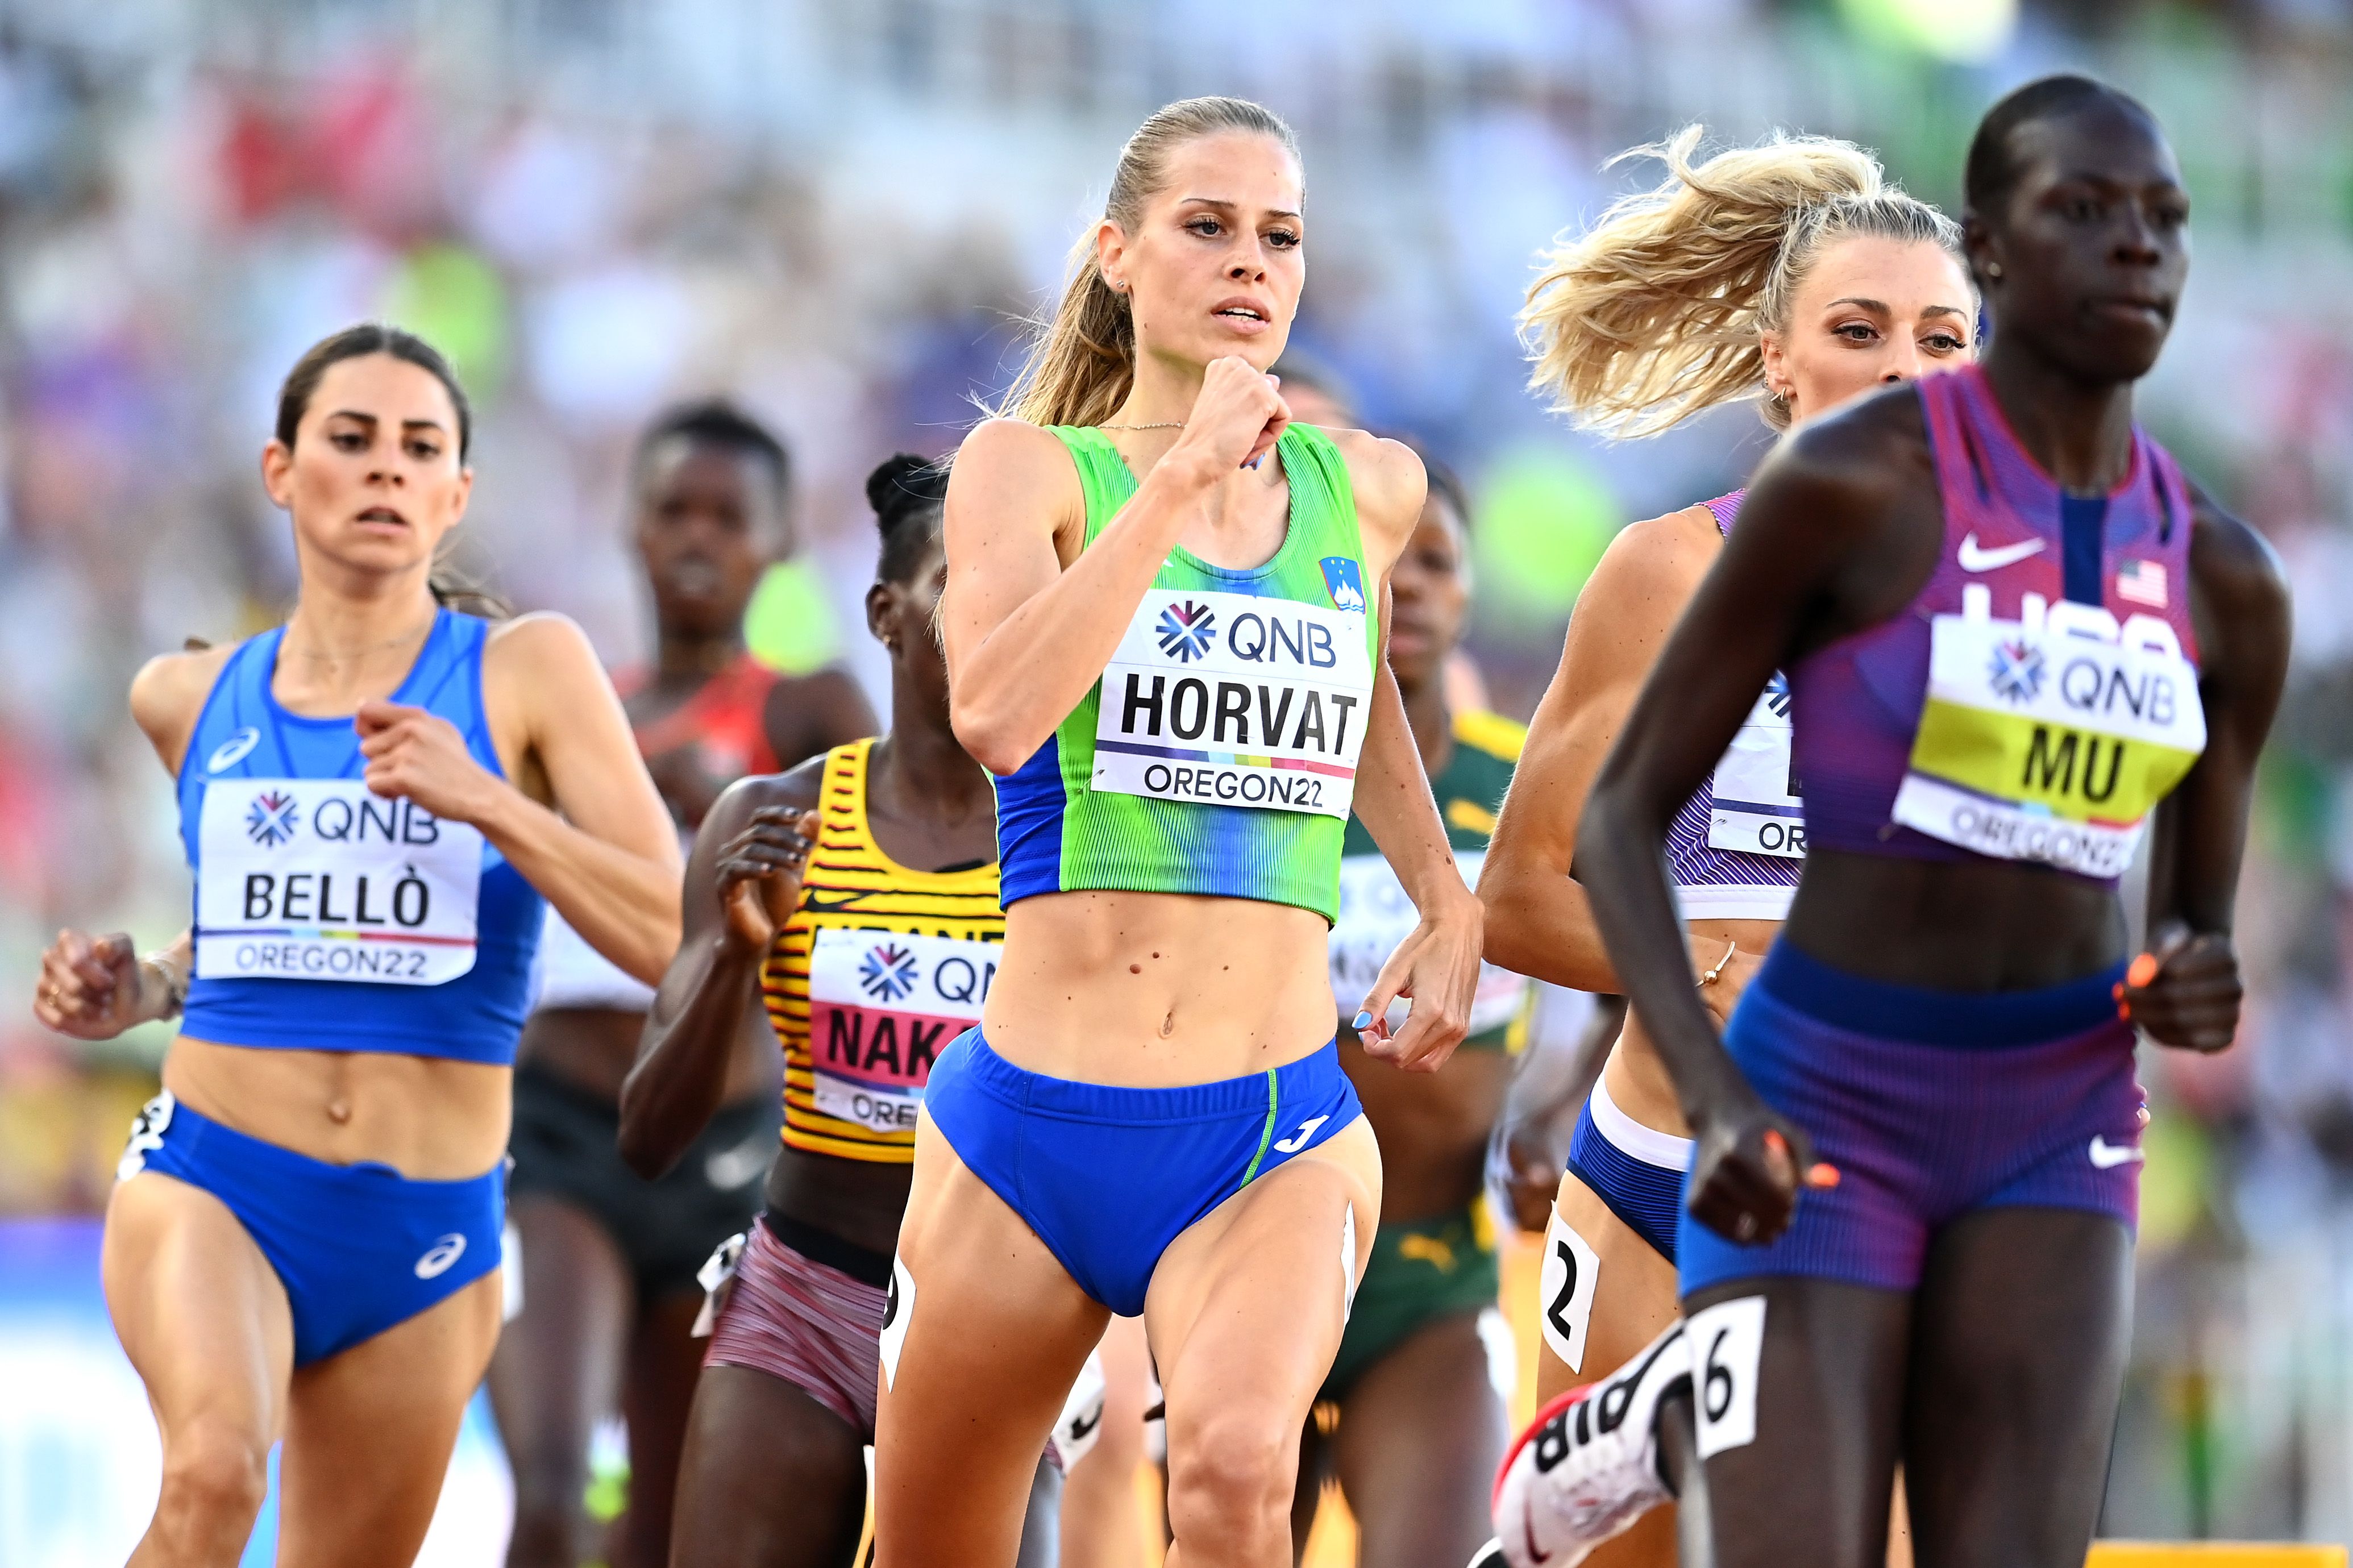 Anita Horvat in the 800m at the World Athletics Championships Oregon22